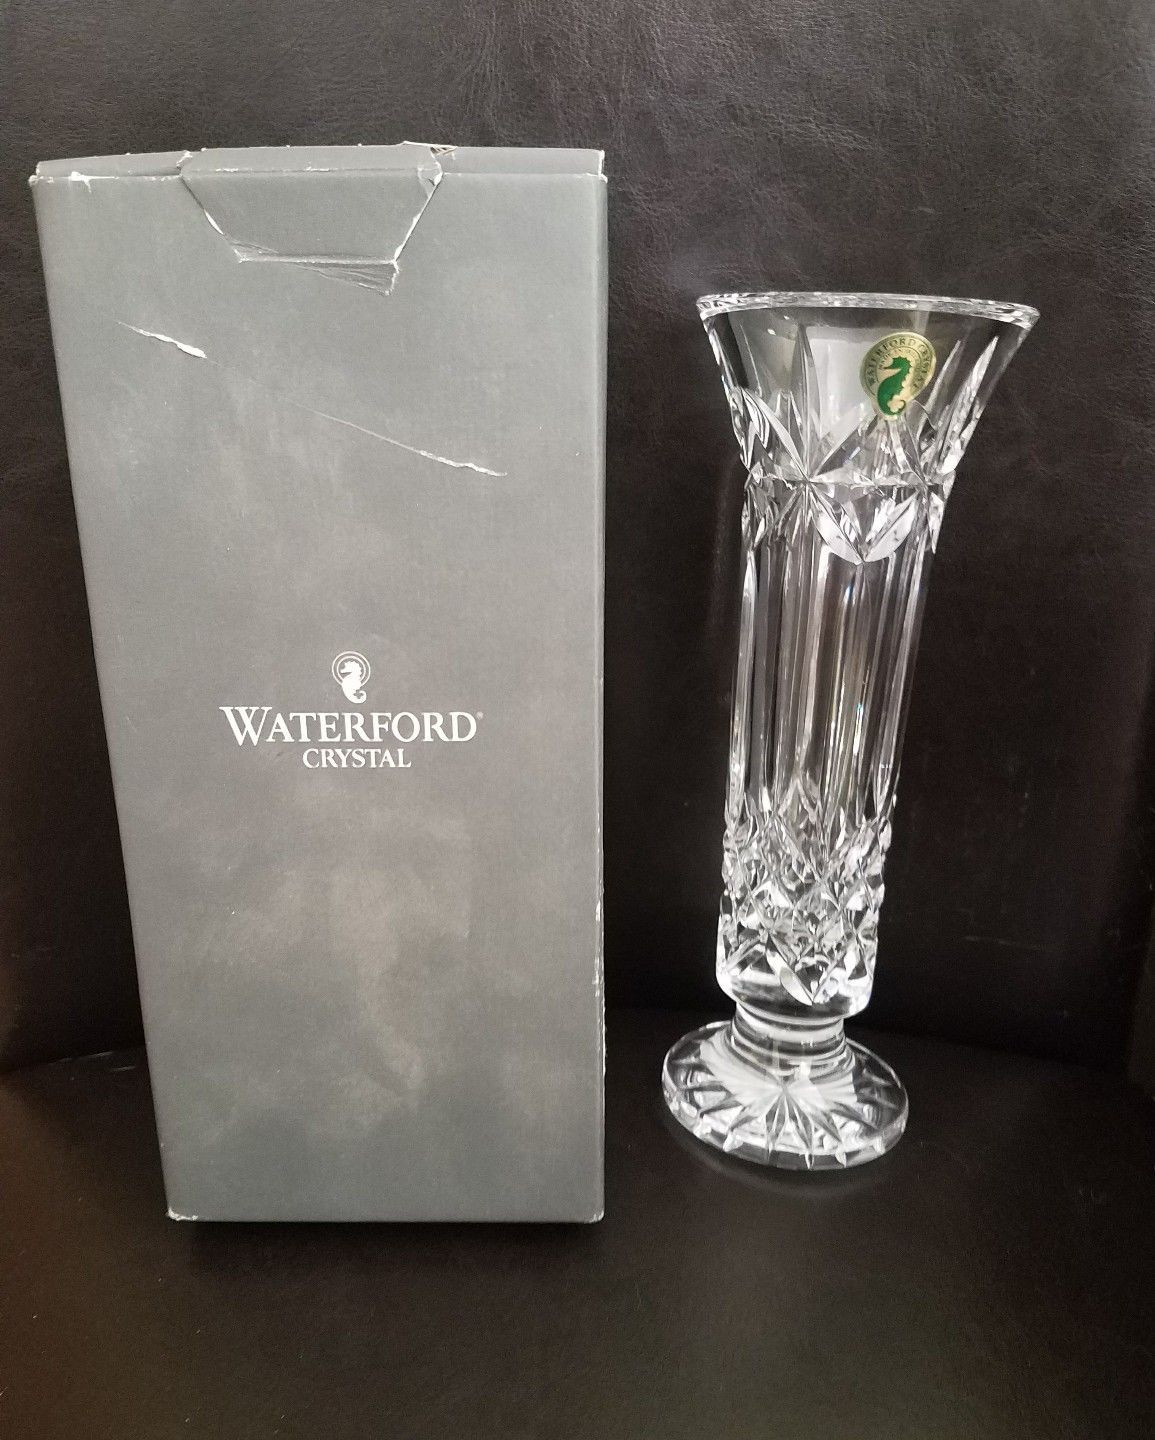 12 Perfect Waterford Crystal Balmoral Vase 2024 free download waterford crystal balmoral vase of waterford balmoral 9 inch bud vase with stickers ebay intended for norton secured powered by verisign